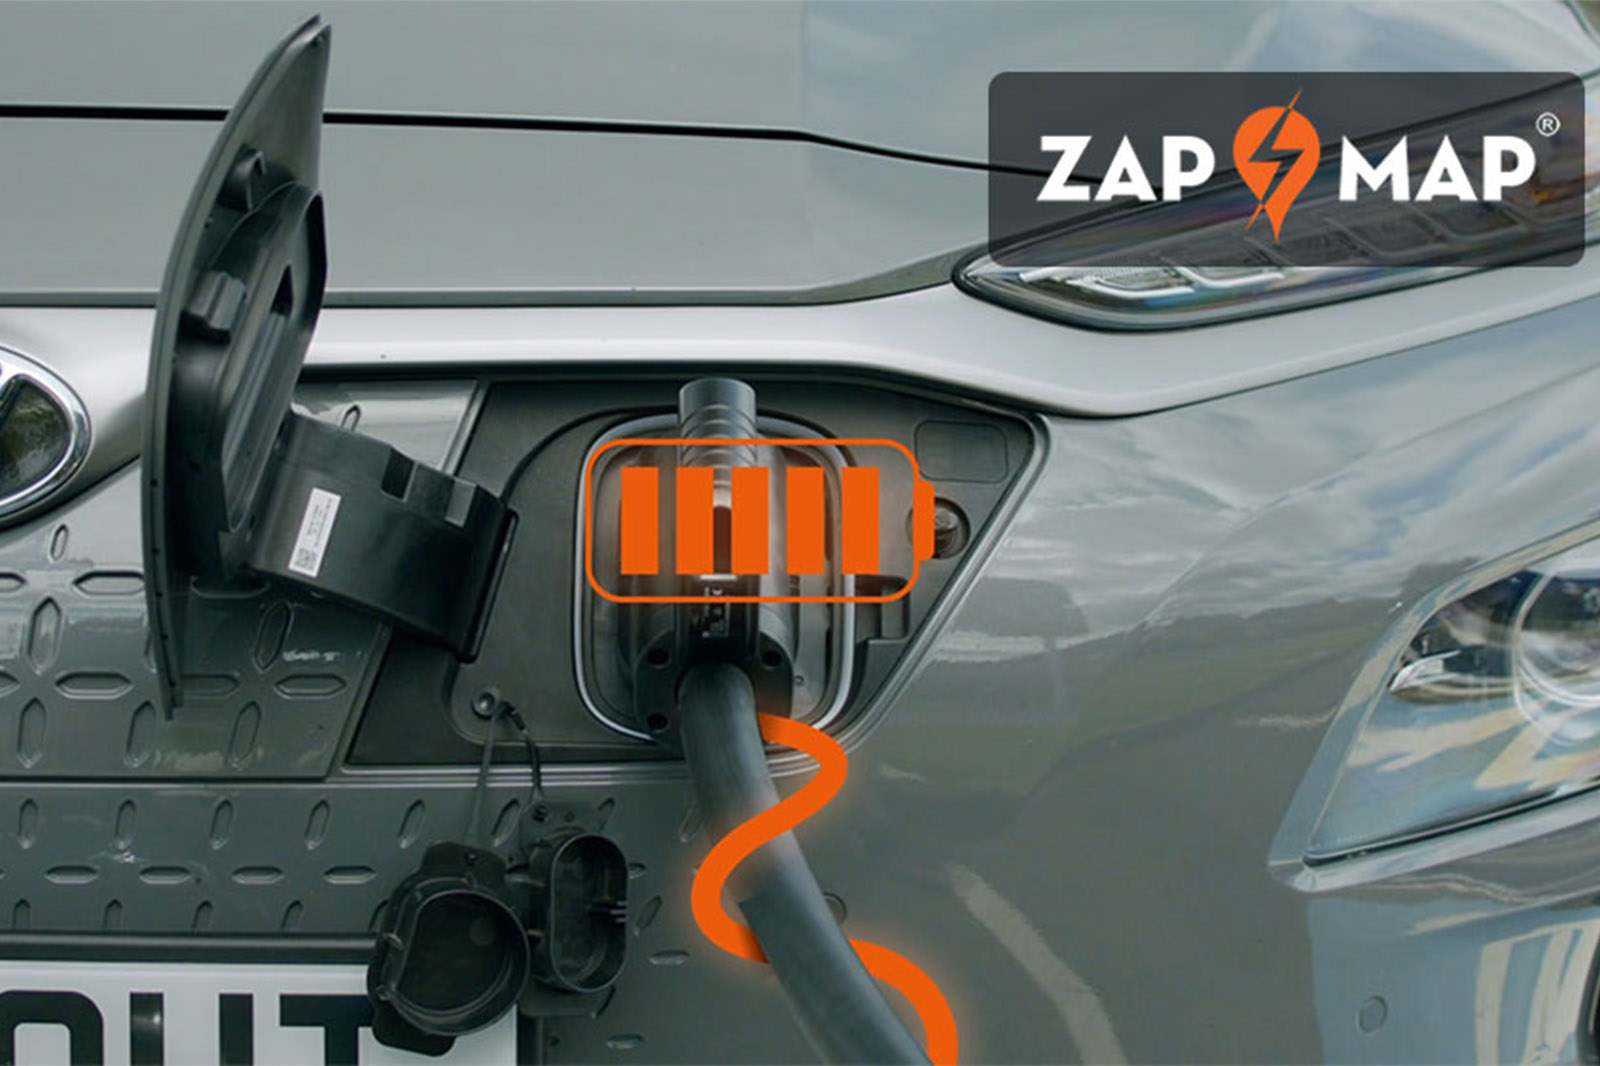 Zap Map Launches Ev Charging Payment App Autocar,How To Make A Small Bathroom Look Like A Spa